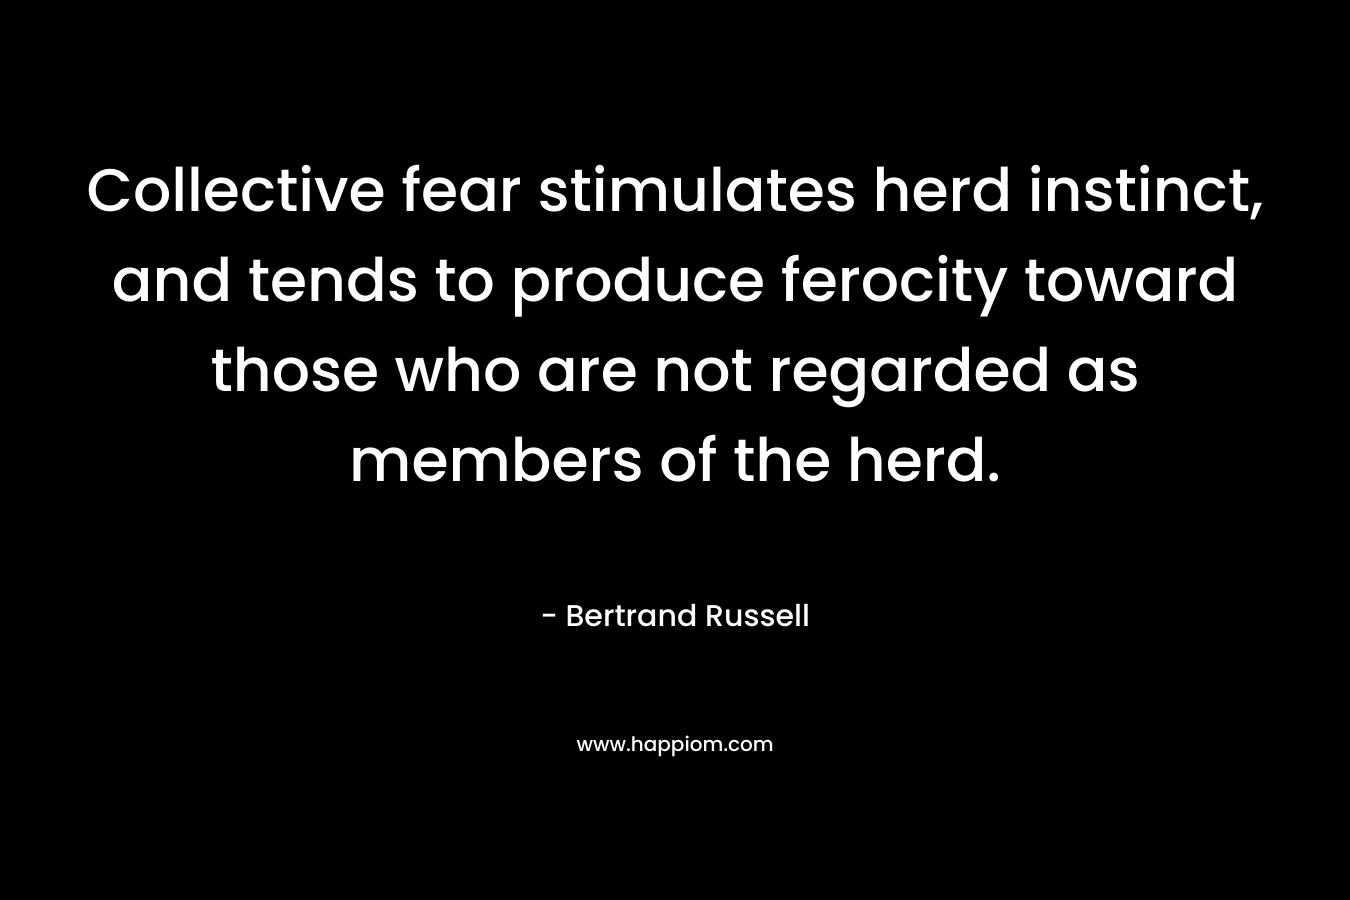 Collective fear stimulates herd instinct, and tends to produce ferocity toward those who are not regarded as members of the herd. – Bertrand Russell